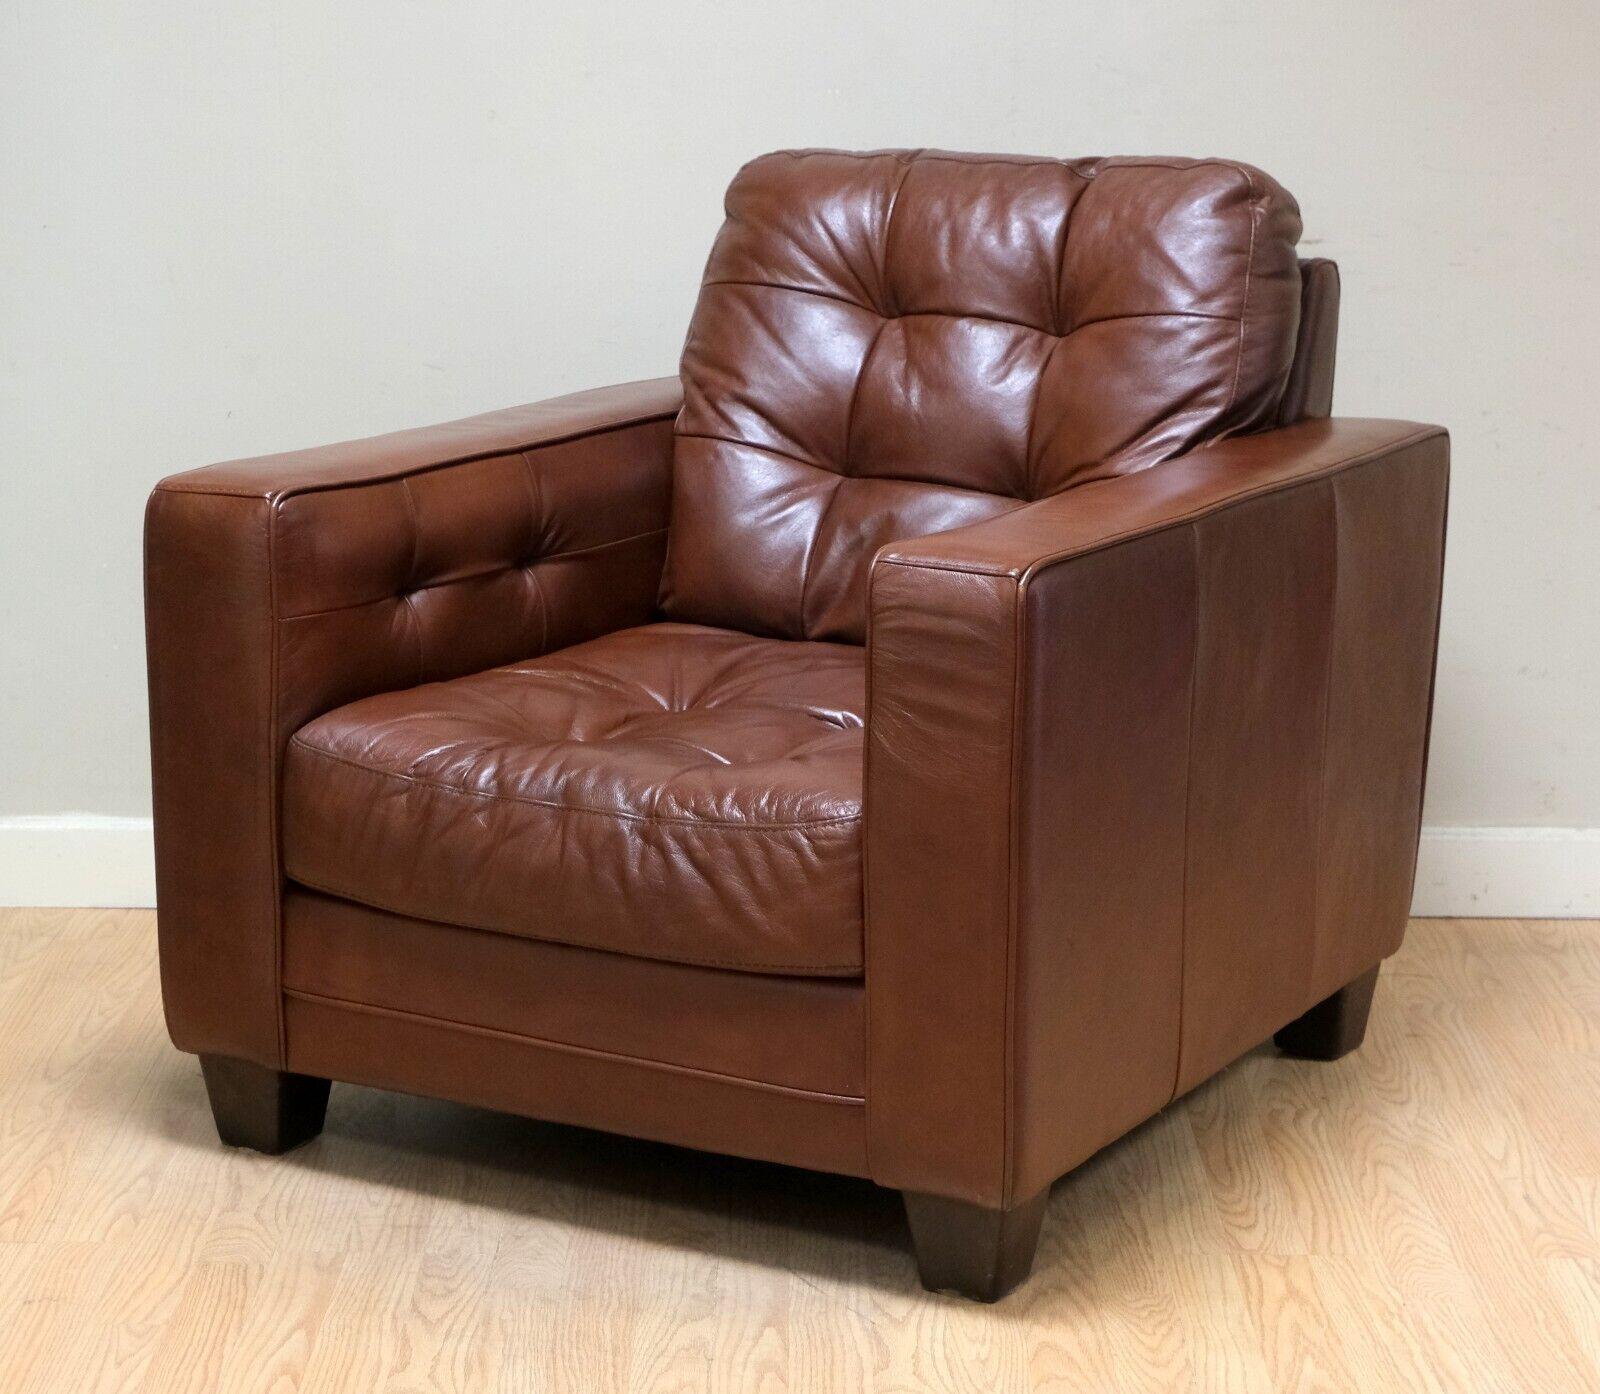 English Aged Knoll Style Brown Leather Armchair Chesterfield Style Buttoning Track Arms For Sale